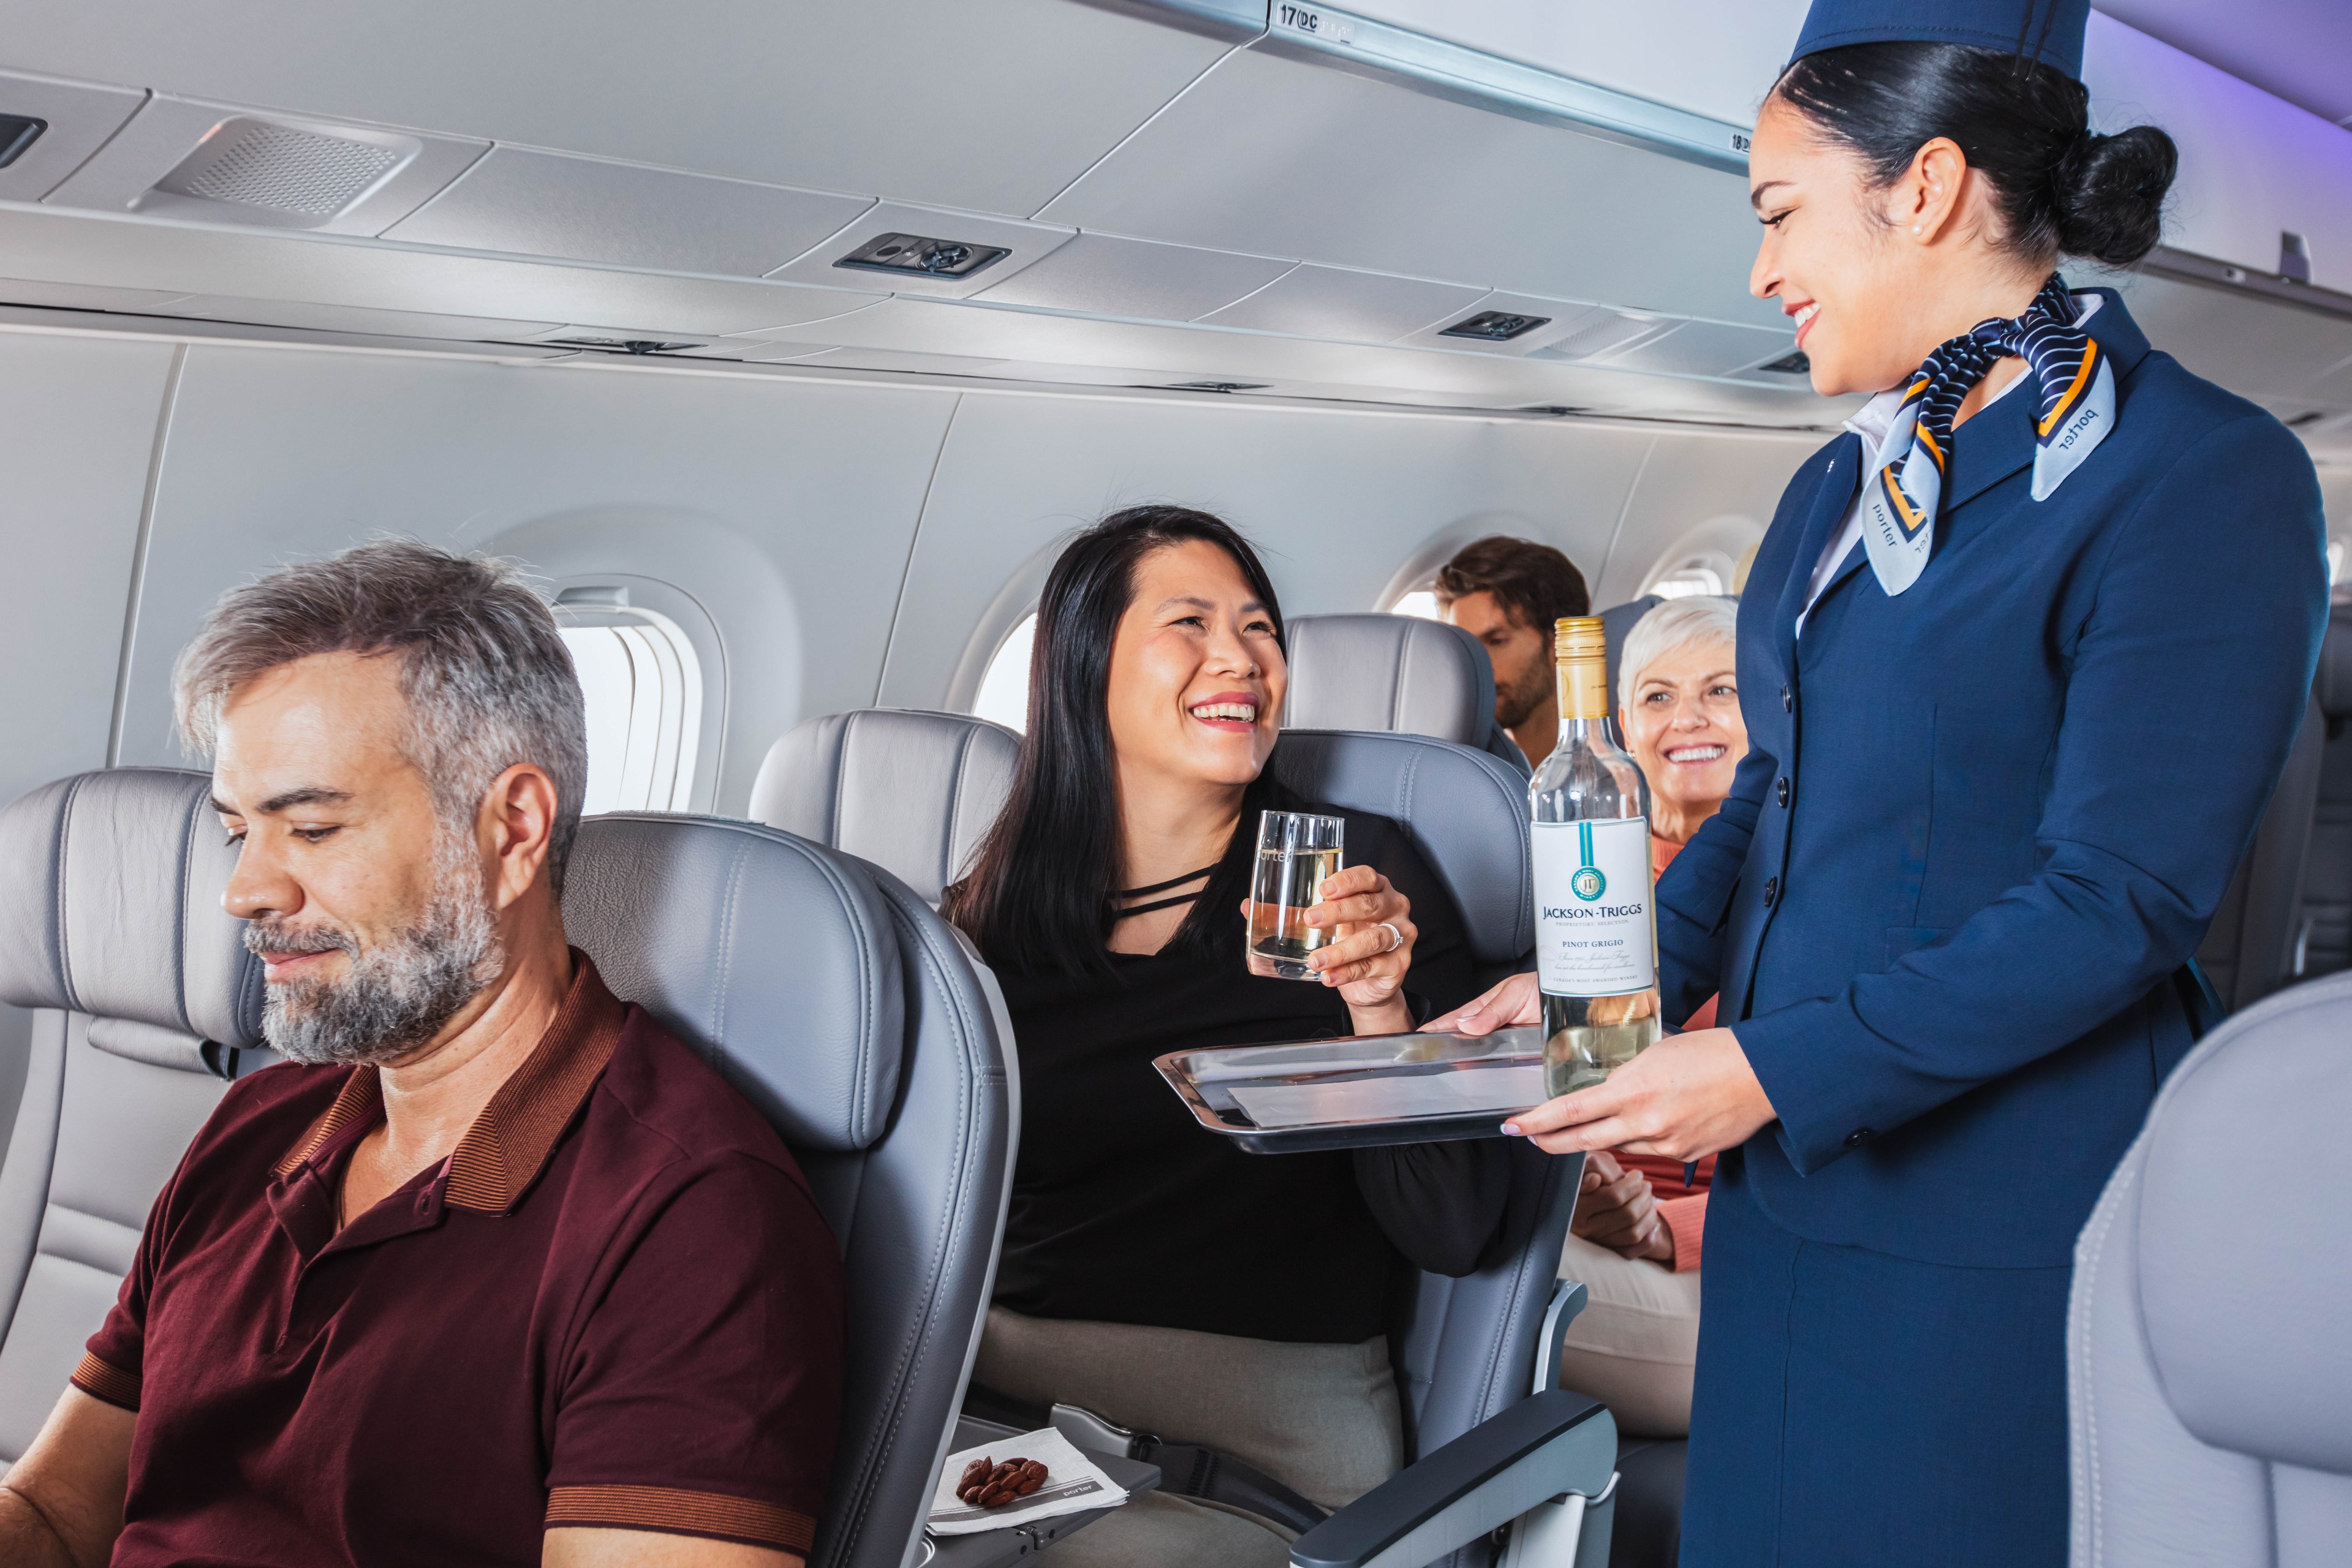 Free beer and wine will be served to passengers aboard Porter Airlines' new nonstop flights between SFO and Toronto.